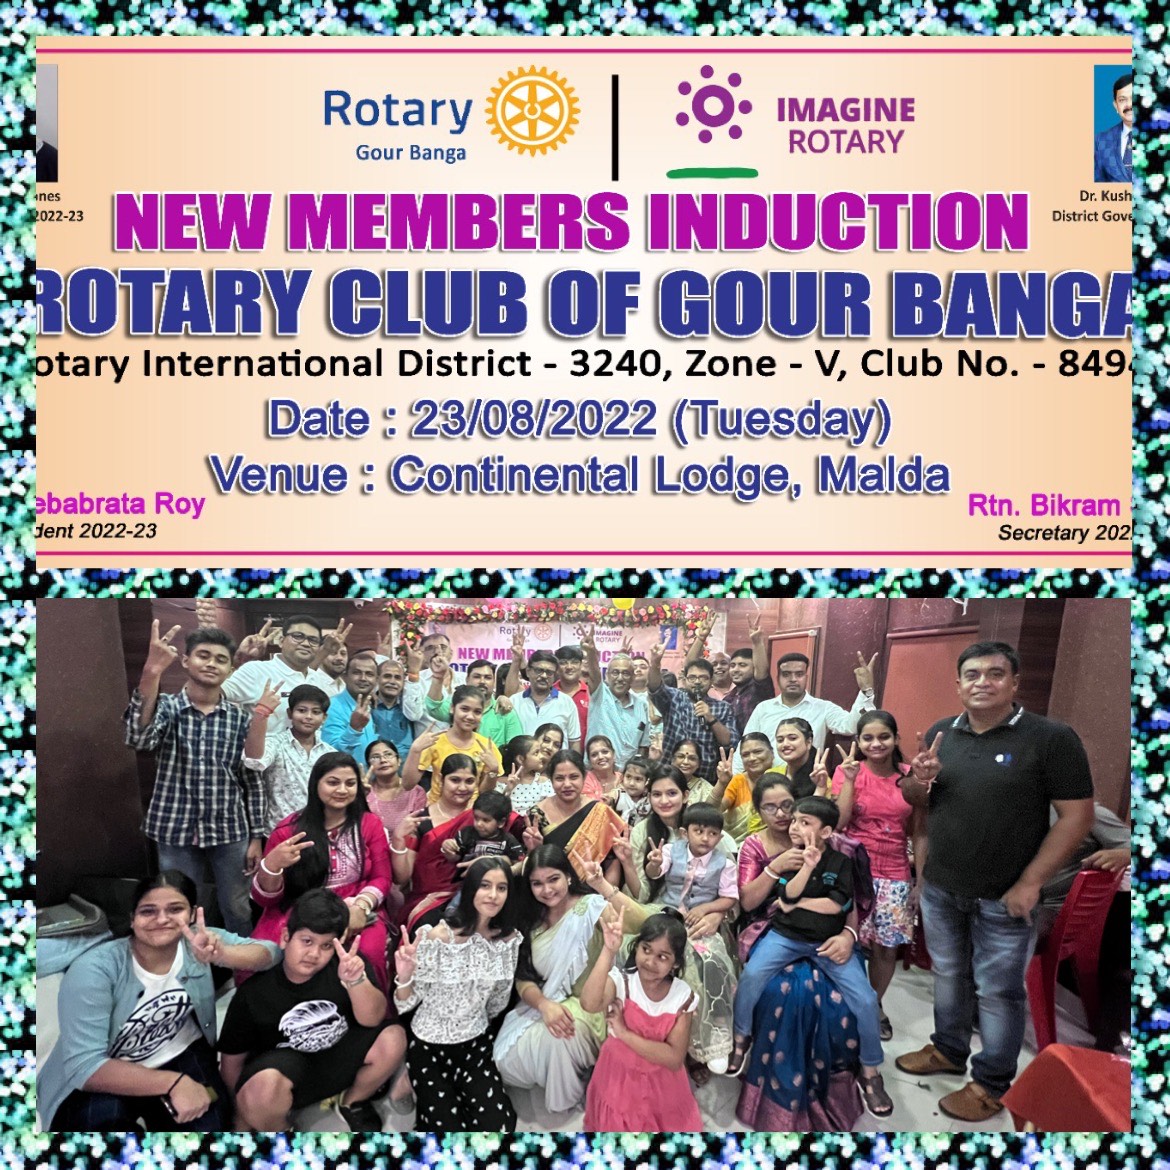 NEW MEMBERS INDUCTION